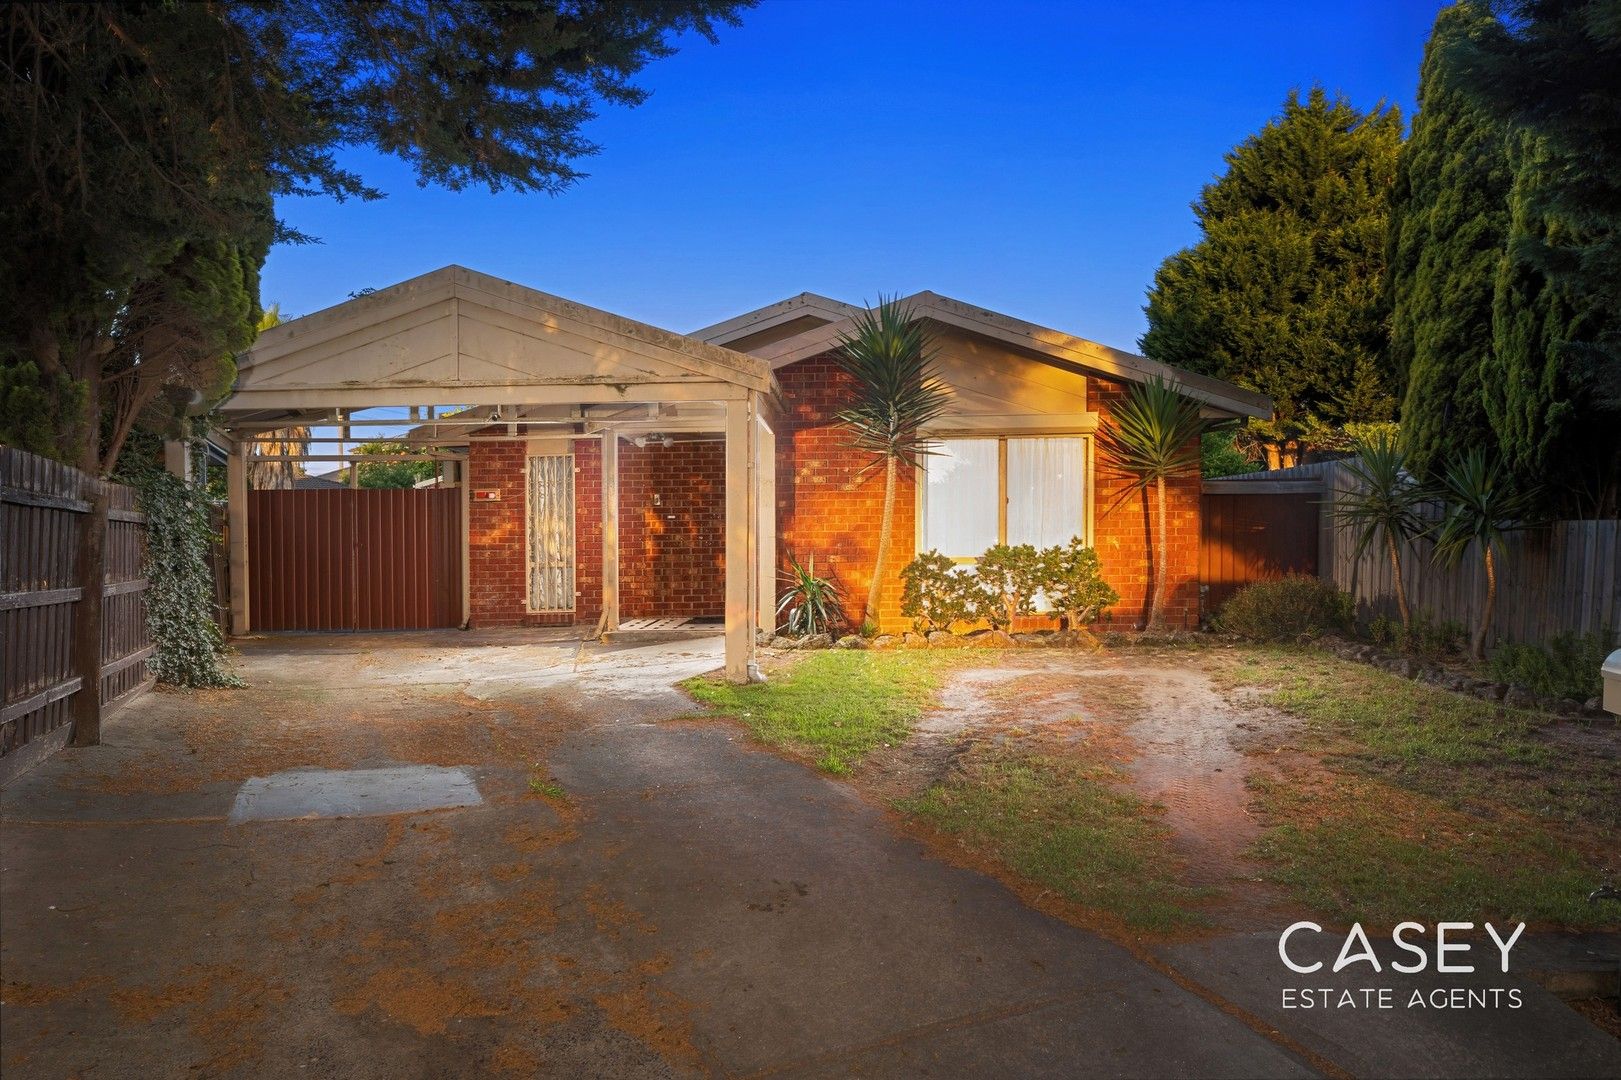 4 bedrooms House in 13 Mosig Court HAMPTON PARK VIC, 3976